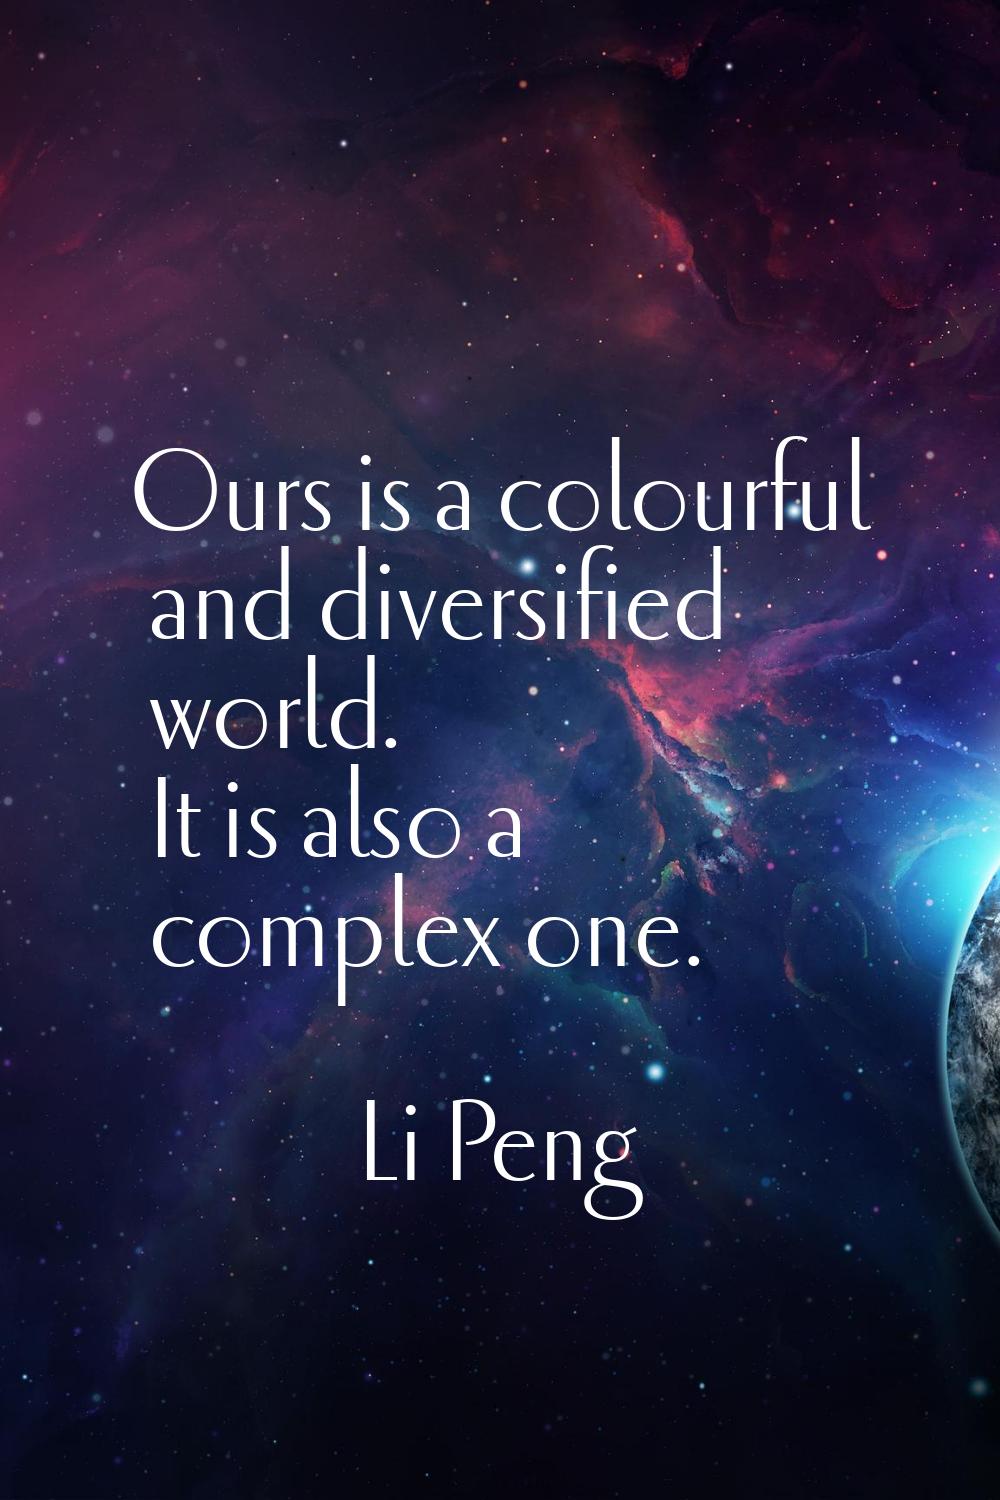 Ours is a colourful and diversified world. It is also a complex one.